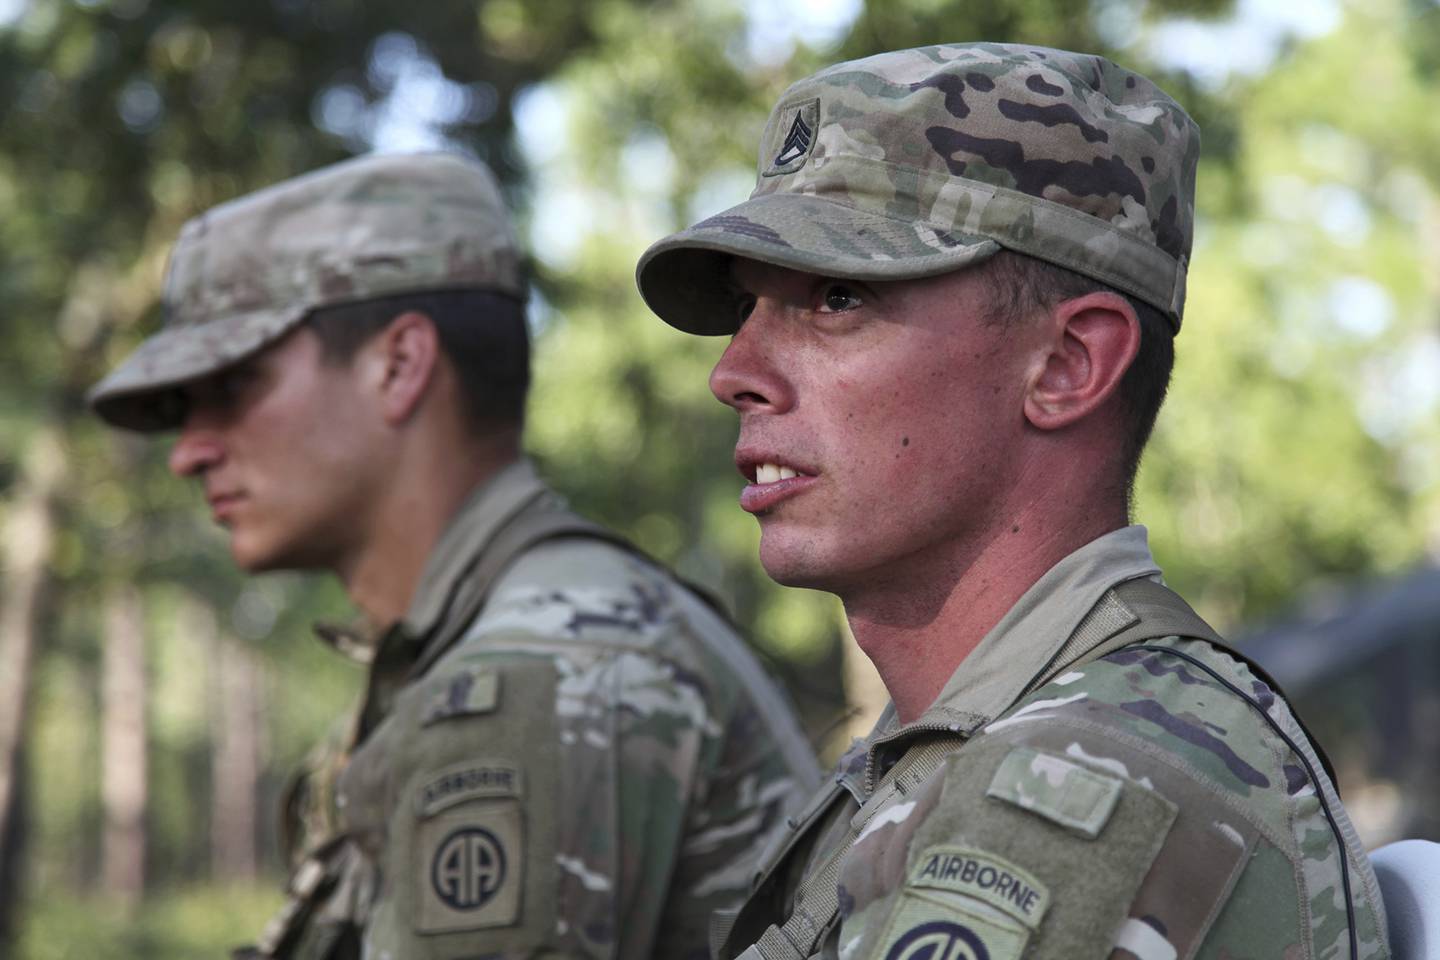 Staff Sgt. Ryan Graves talks about the death of his fellow solider, Staff Sgt. Jason Lowe, during an interview on Aug. 26, 2020, on Fort Bragg, N.C.